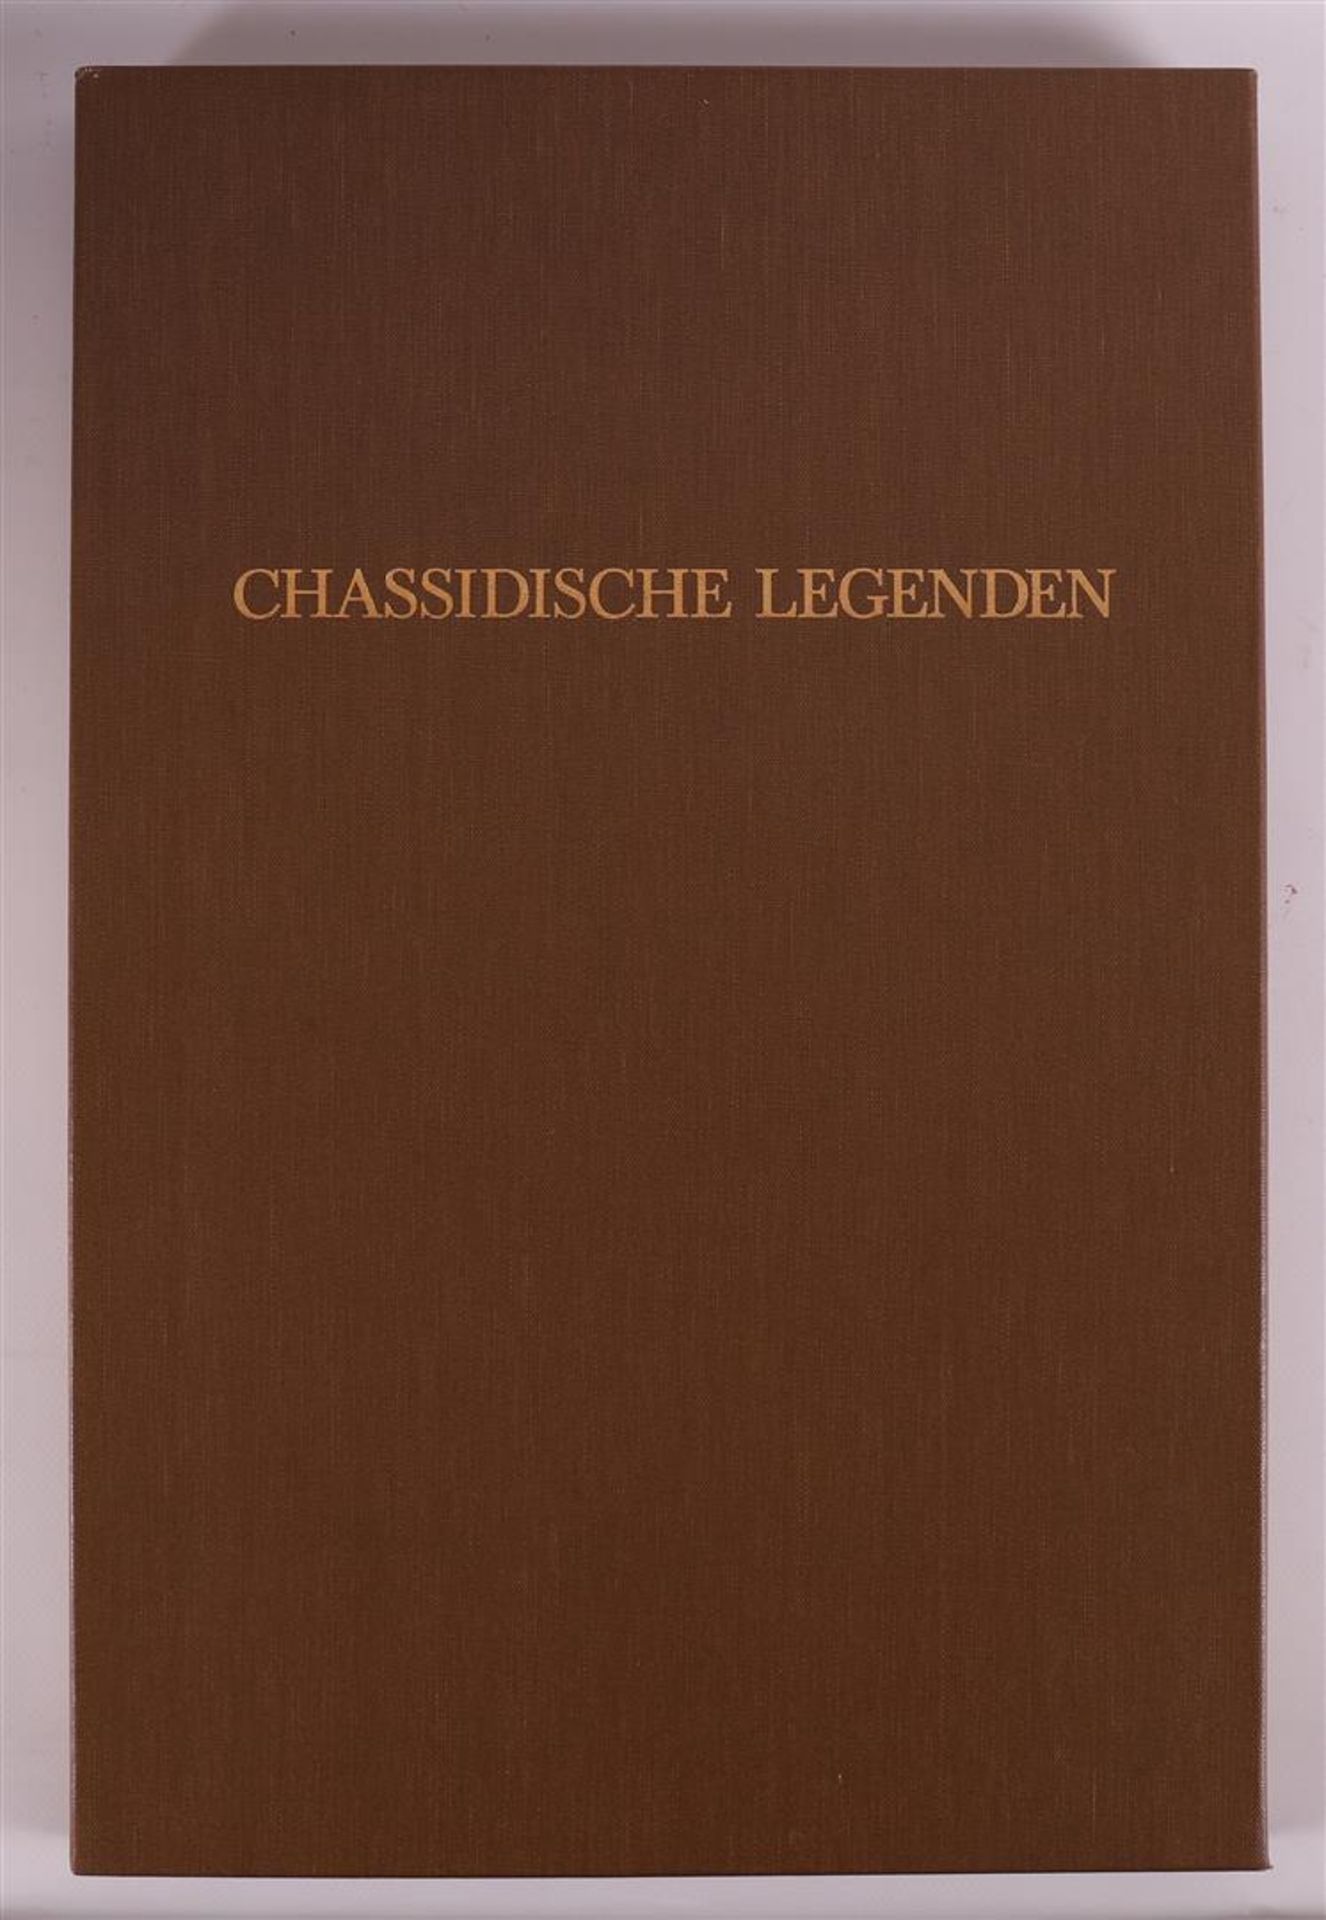 'Hasidic Legends', a suite by H.N. Workman. Reproduction.